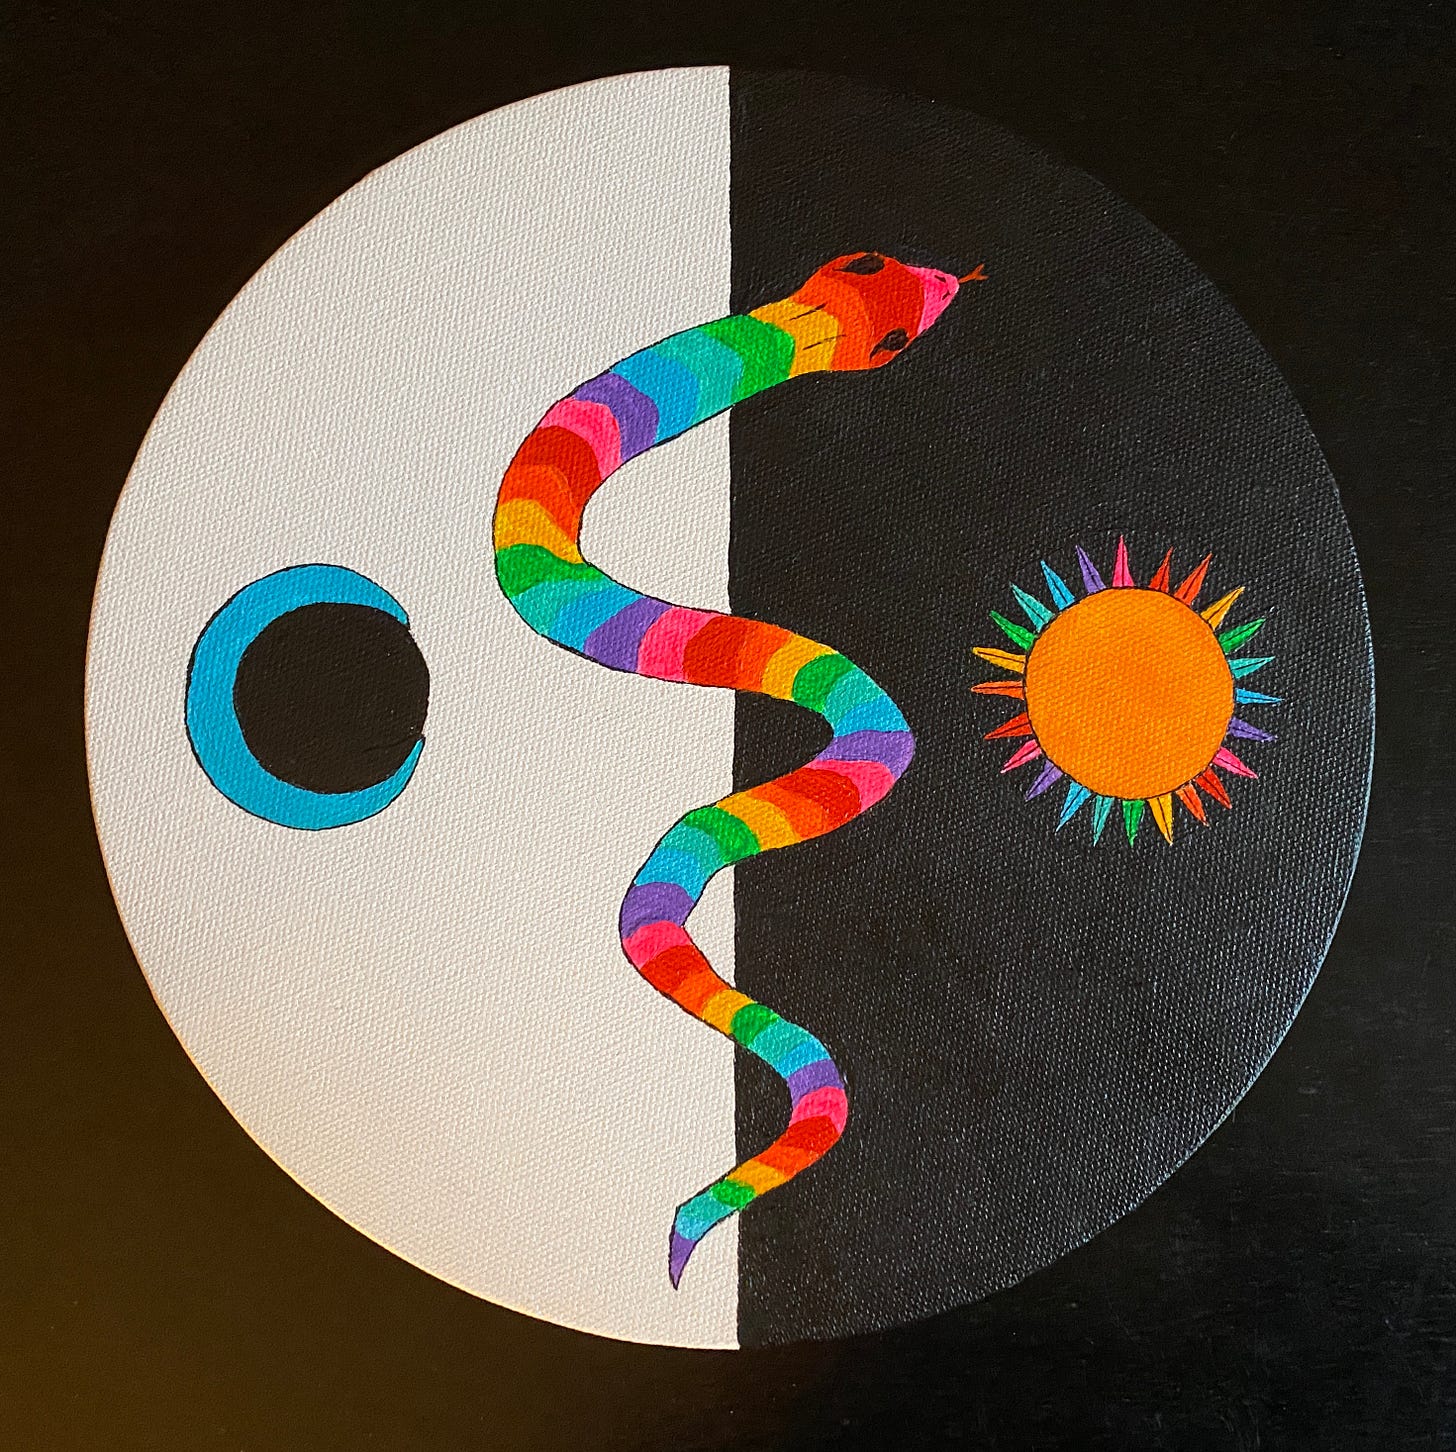 A round canvas painted with a rainbow snake against a black and white background, with the sun on the dark side and the moon on the light side